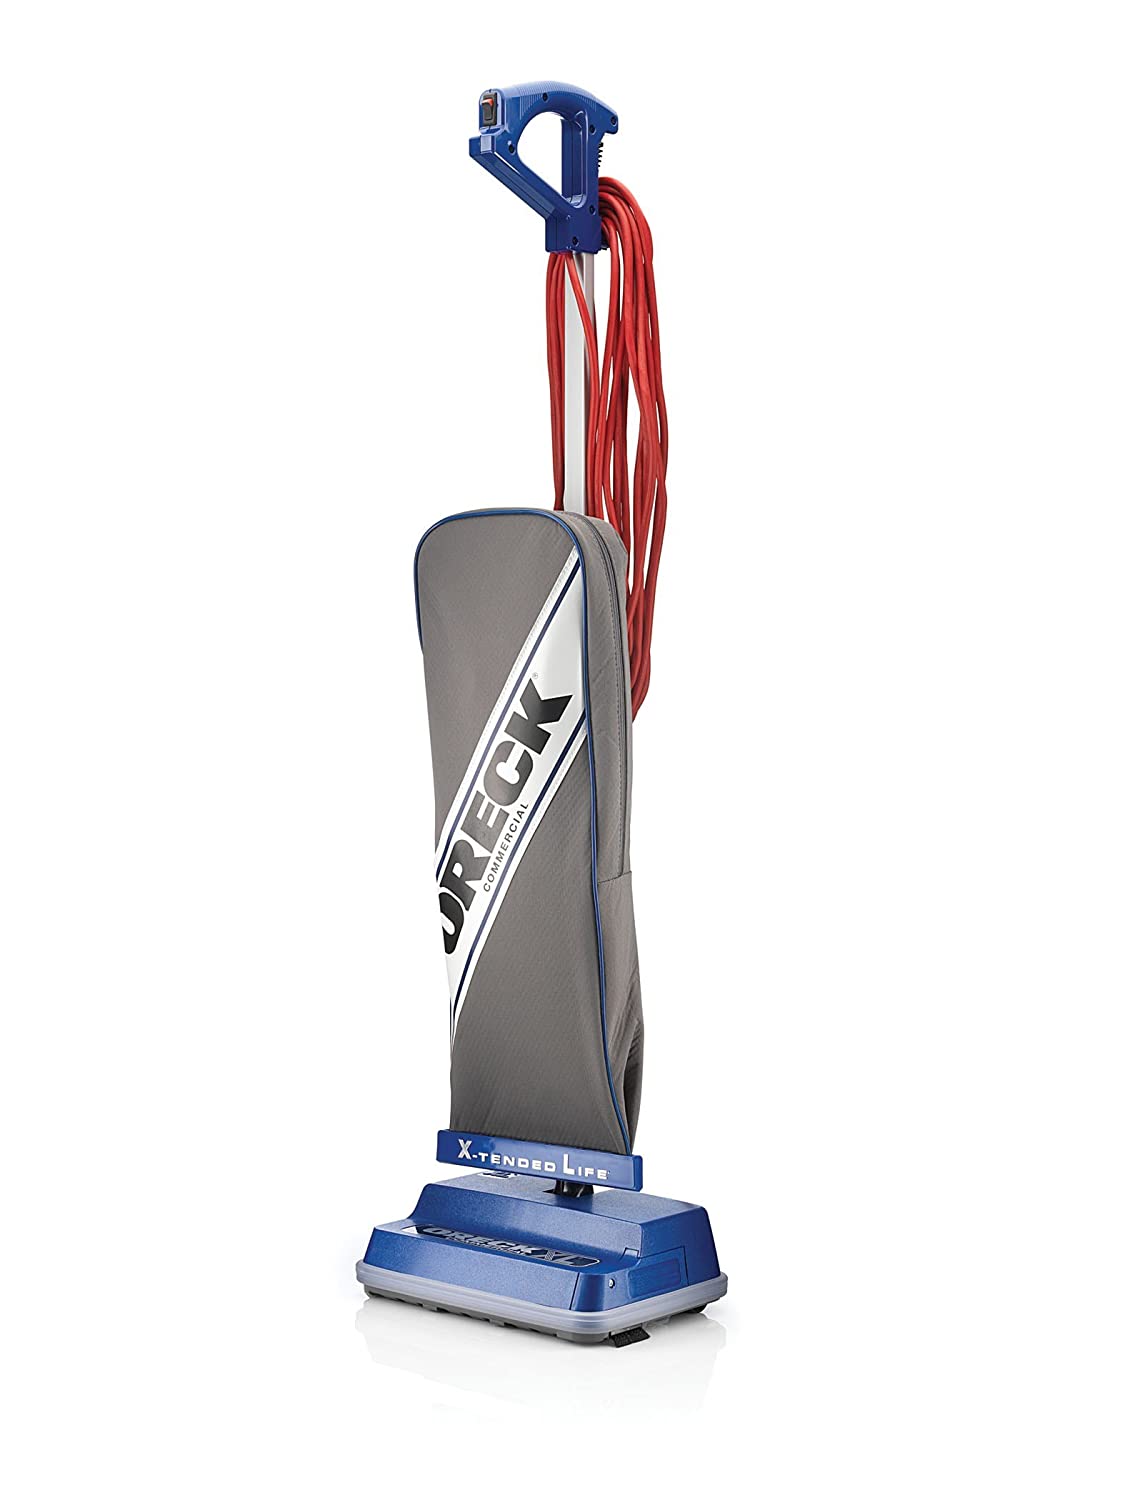 ORECK XL COMMERCIAL Upright Vacuum Cleaner, Bagged Professional Pro Grade, For Carpet and Hard Floor, XL2100RHS, Gray/Blue